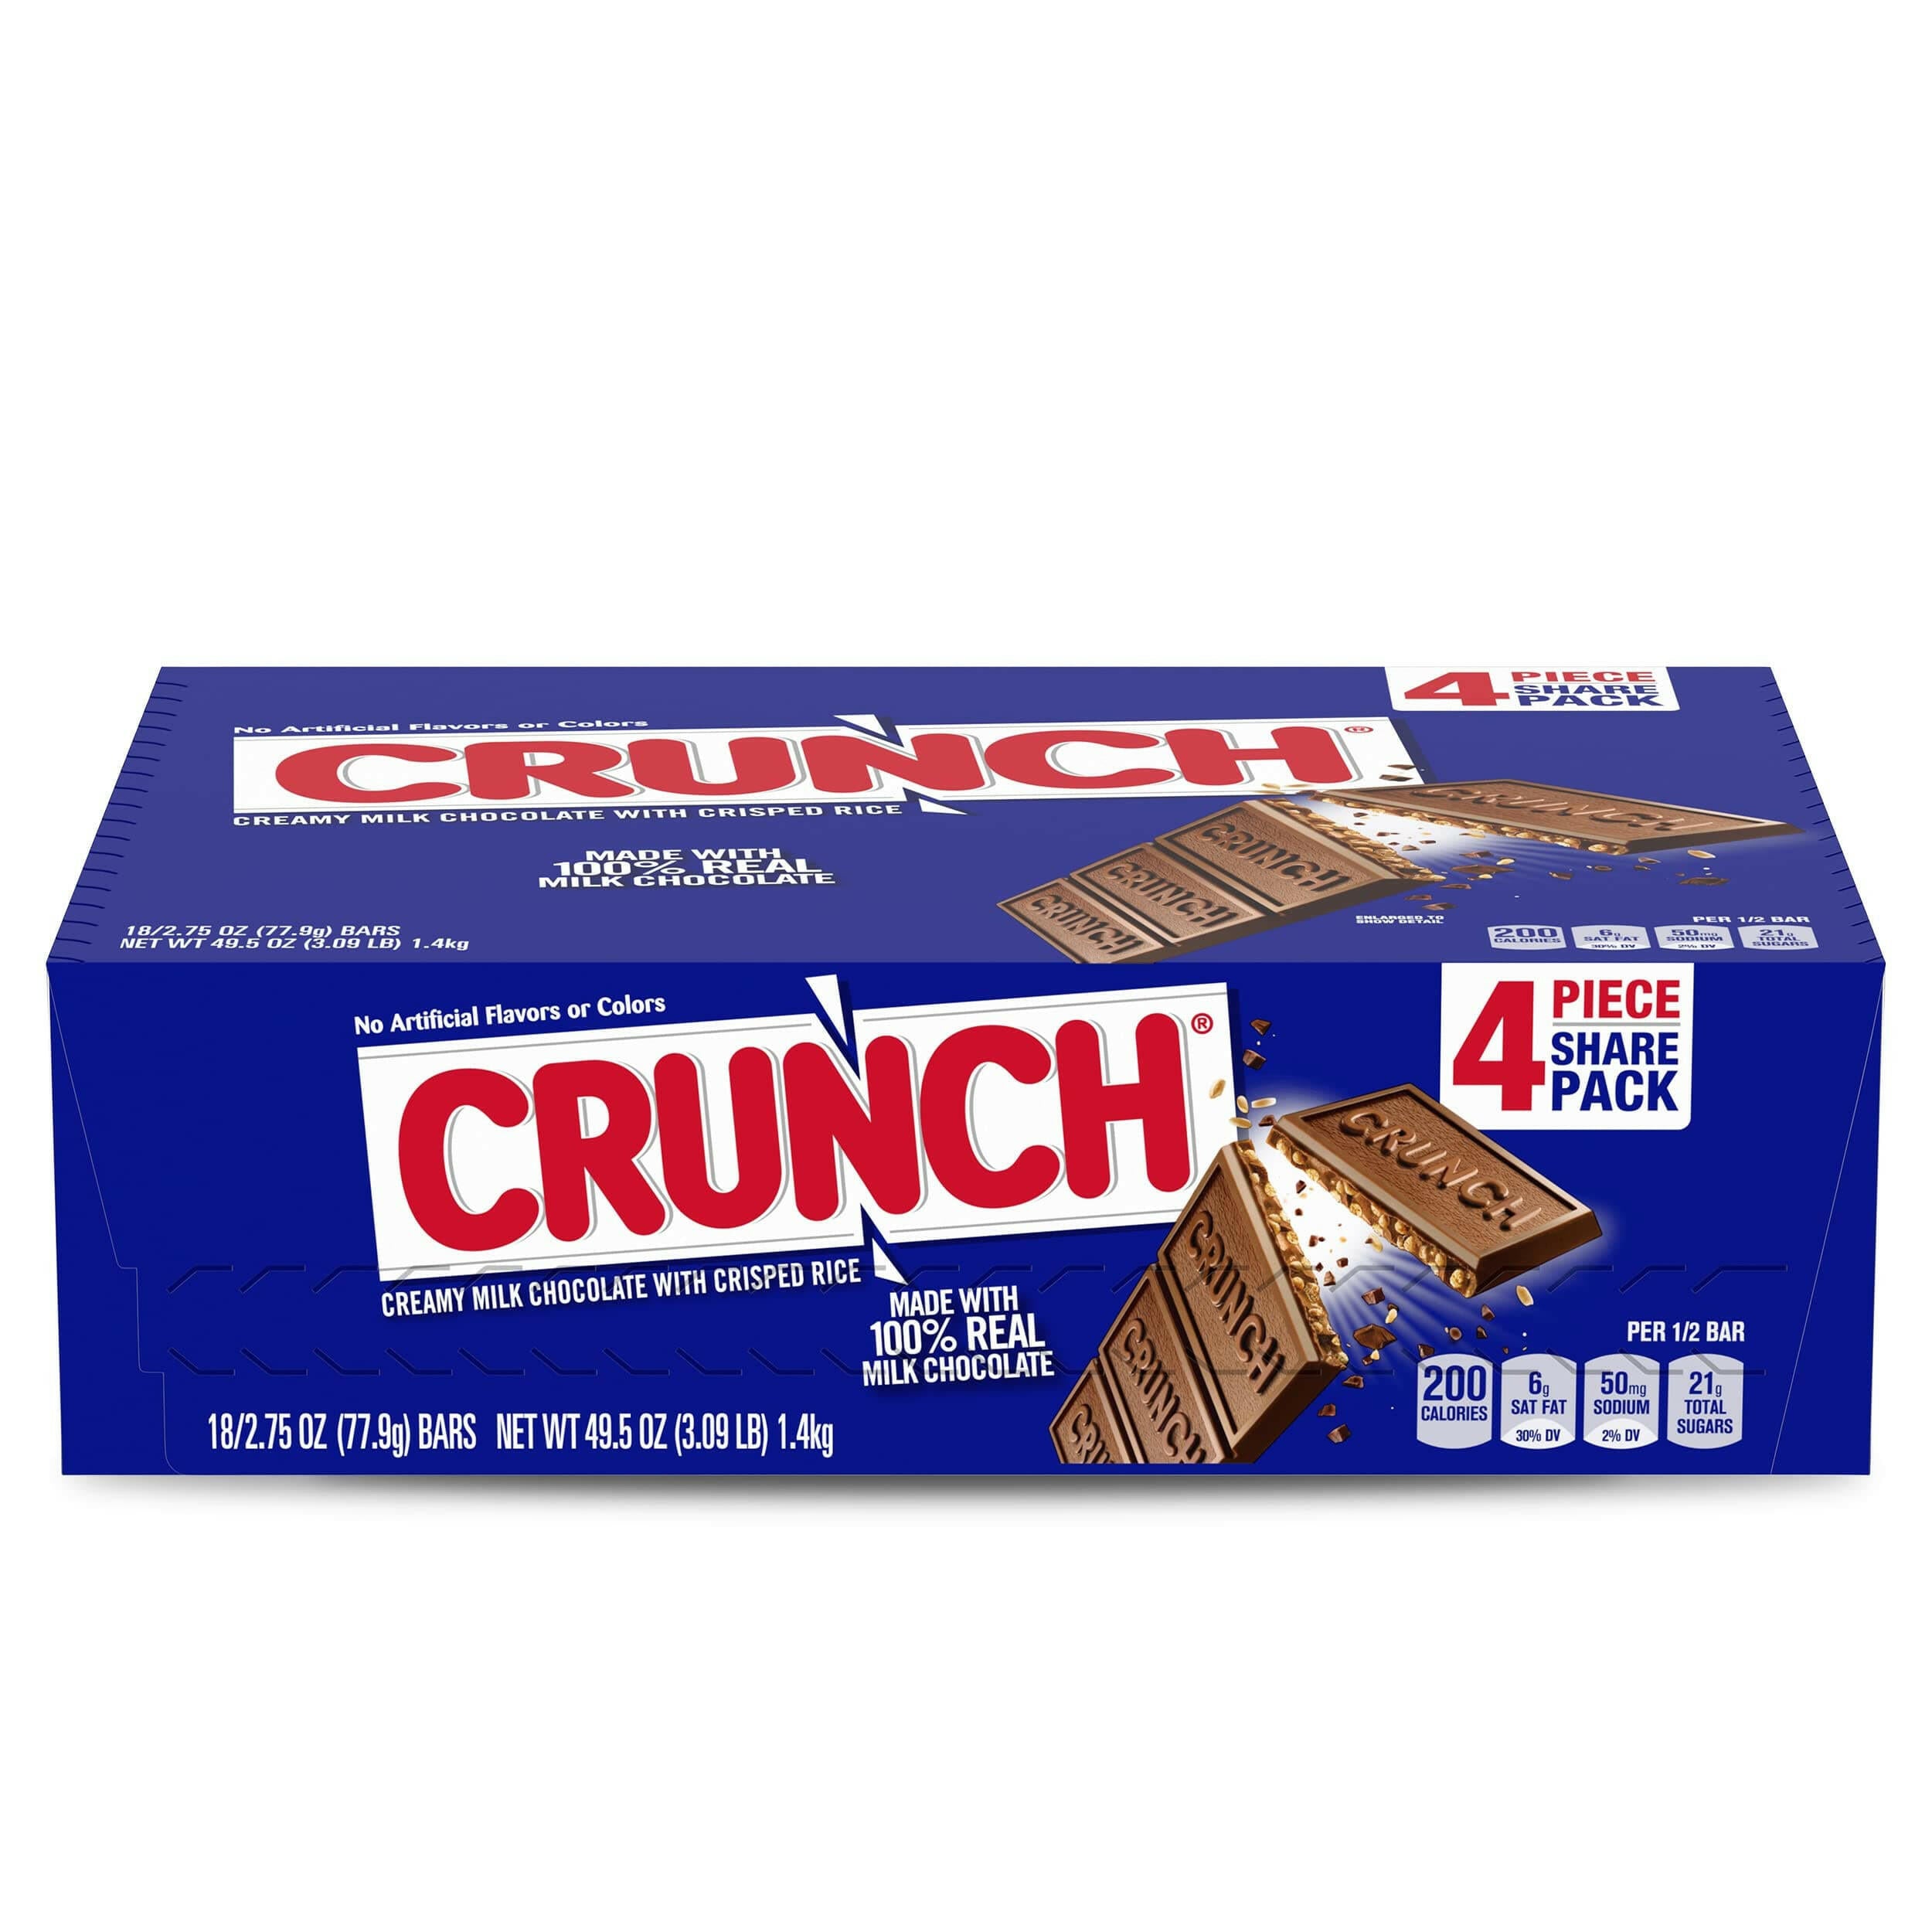 Crunch Candy Pieces made of milk chocolate 18/2.75 OZ.